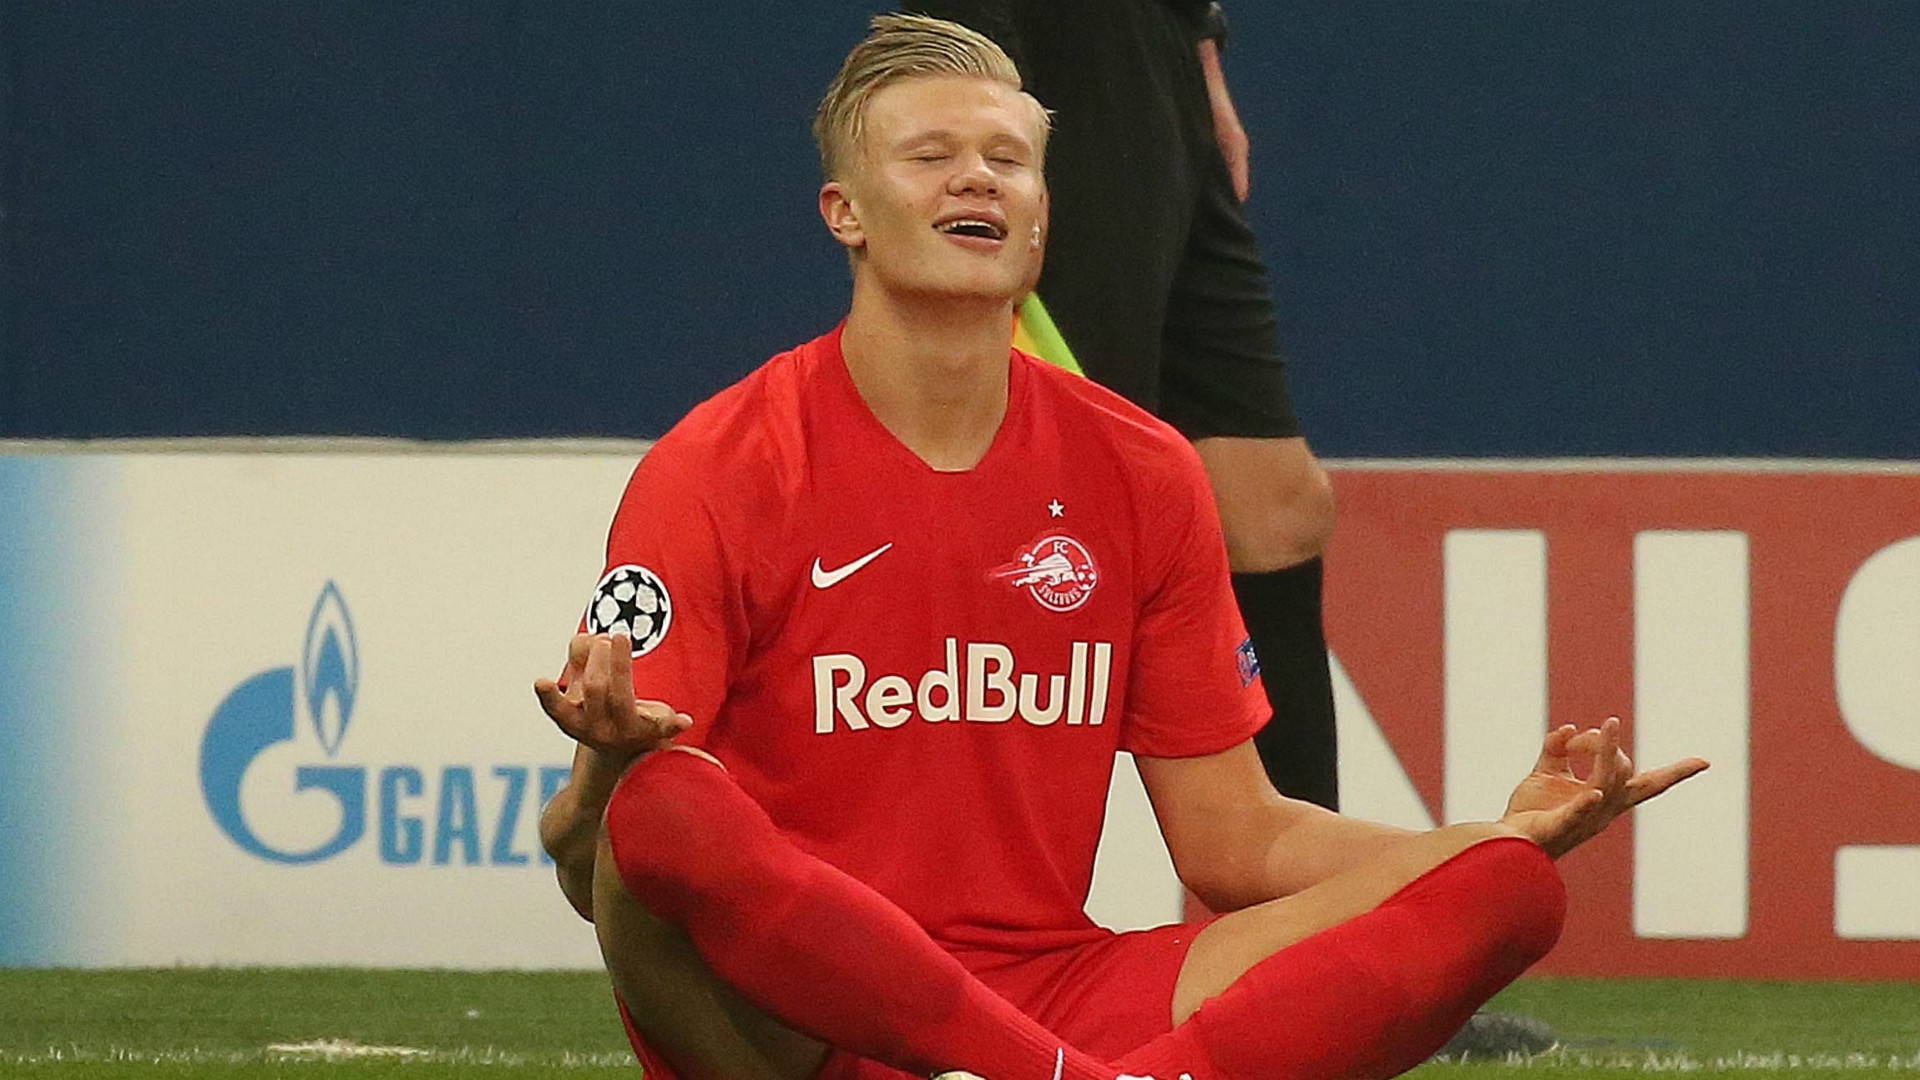 ‘He is a player I like' - Solskjaer confirms Man Utd are 'looking' at Haaland